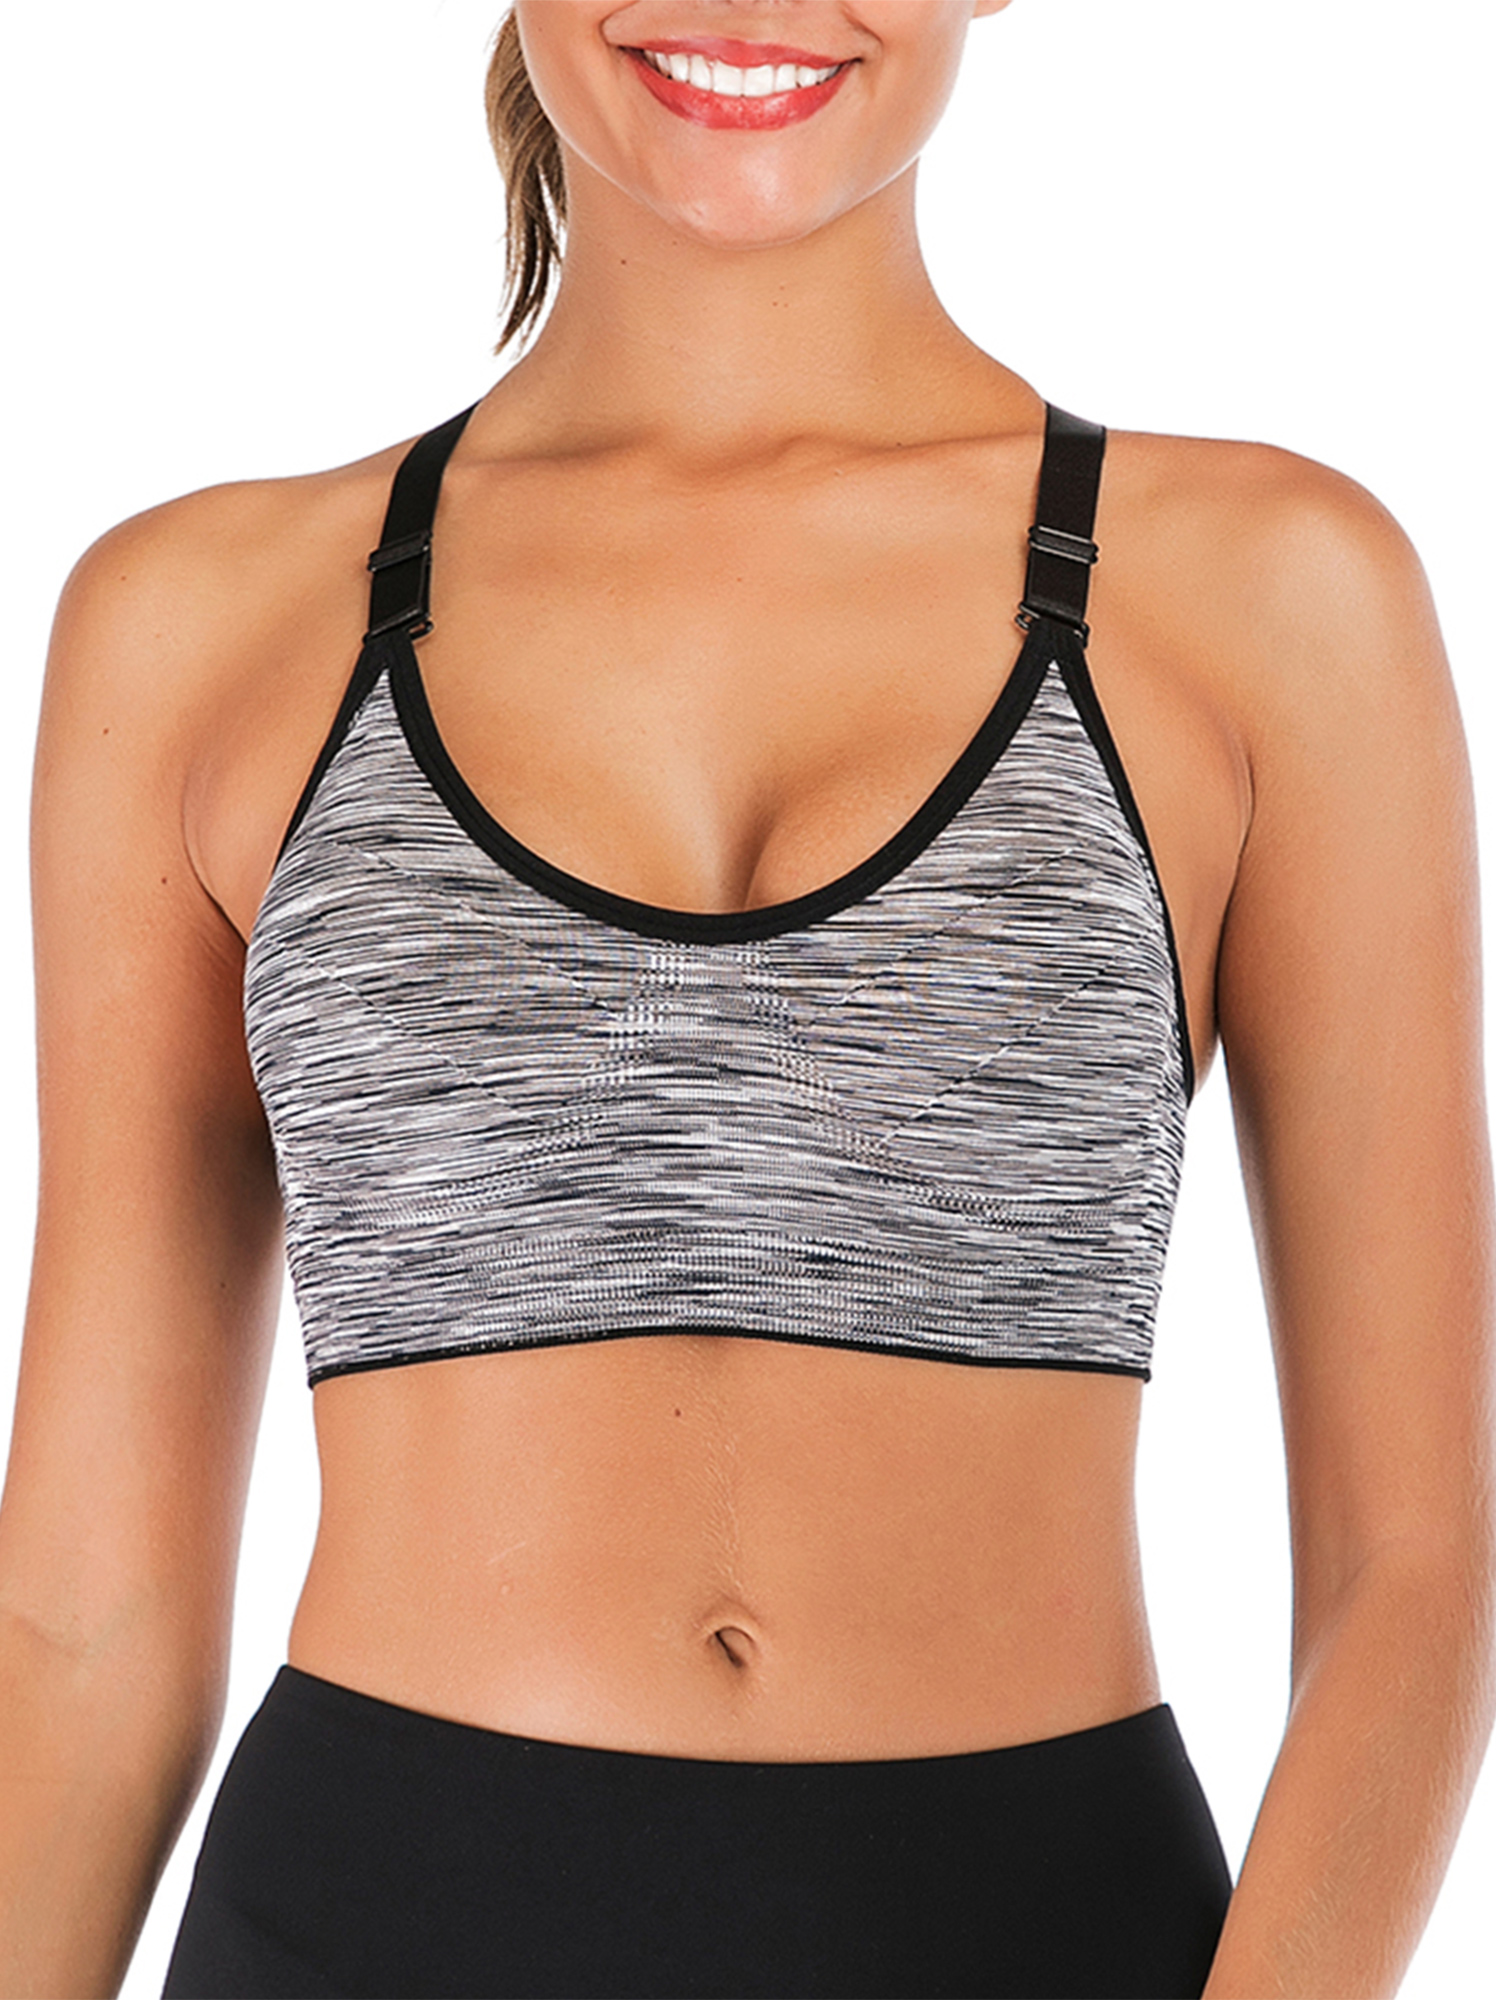 Women's Seamless Wirefree Racerback Adjustable Straps Yoga Sports Bra Top Lingerie - image 1 of 7